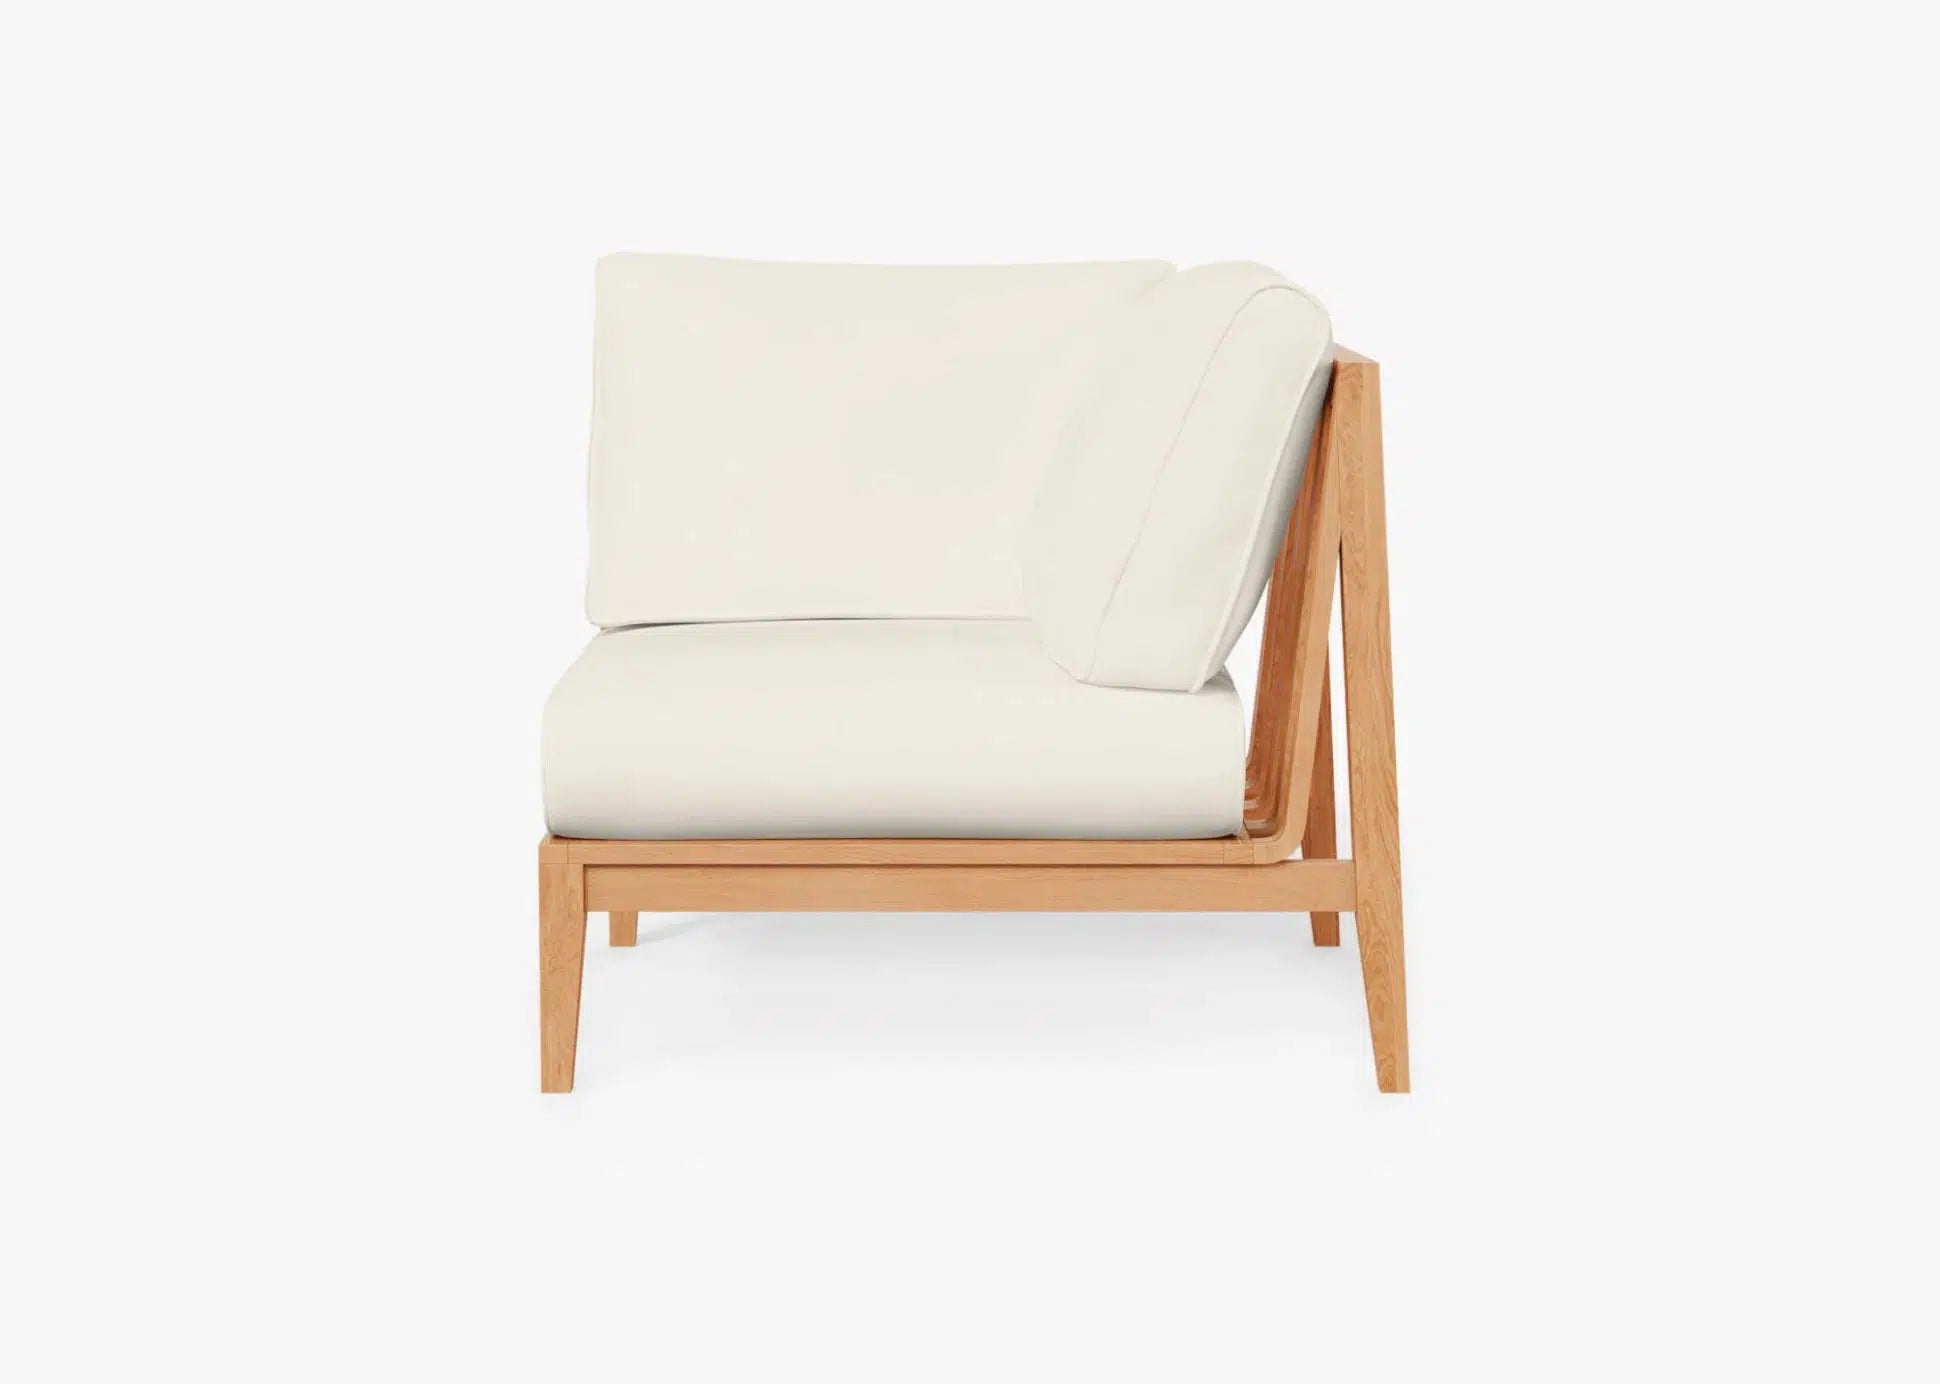 Live Outer 34" Teak Outdoor Left Corner Chair With Palisades Cream Cushion